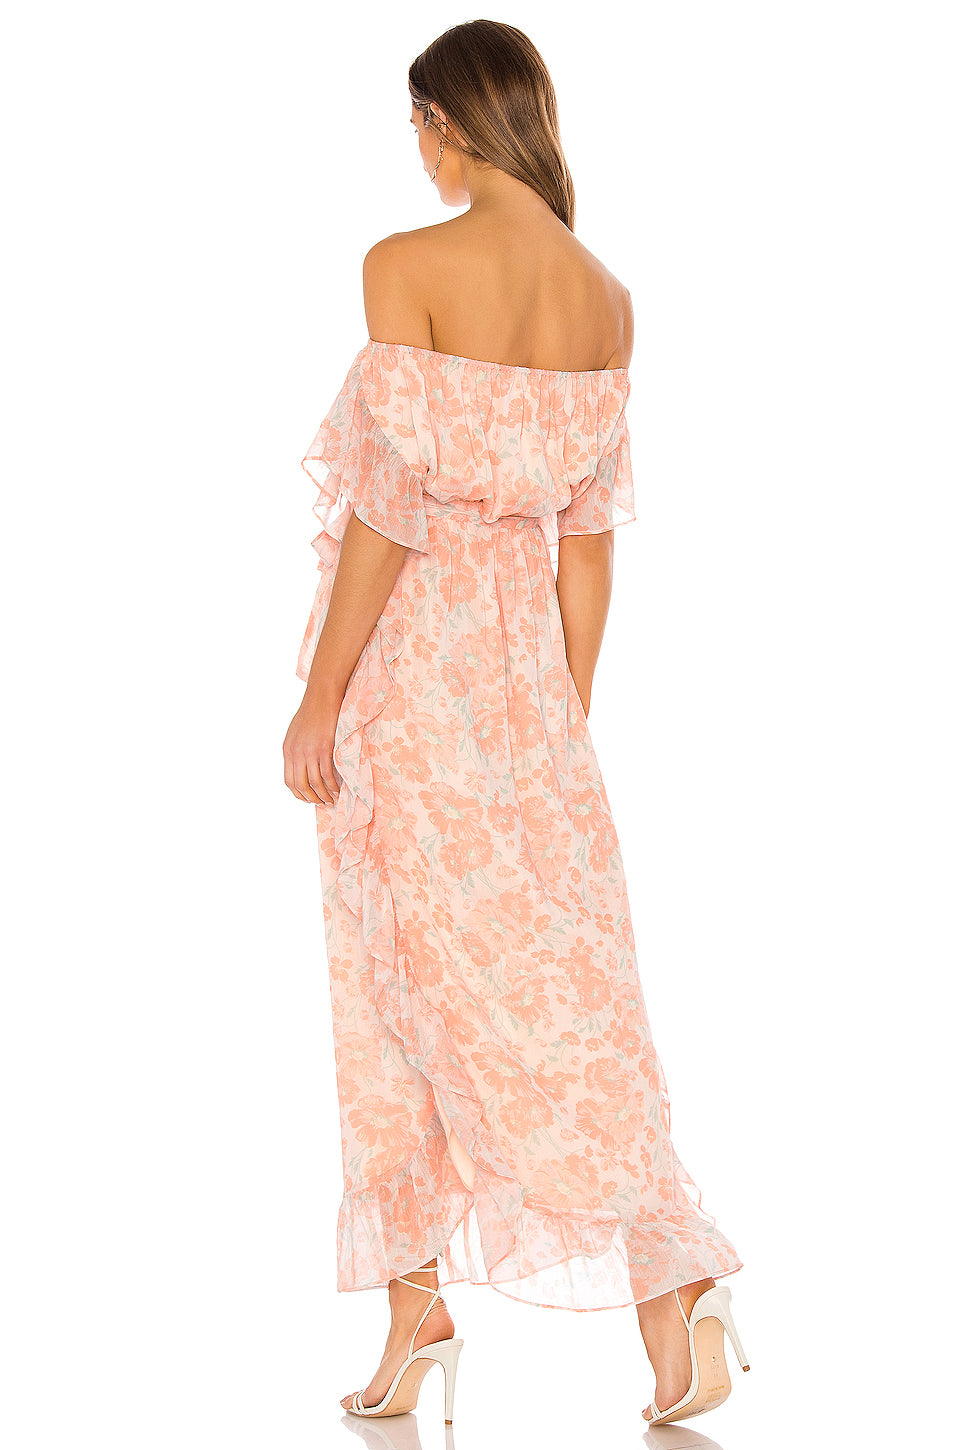 Blaire Dress in BLUSH POPPY FLORAL